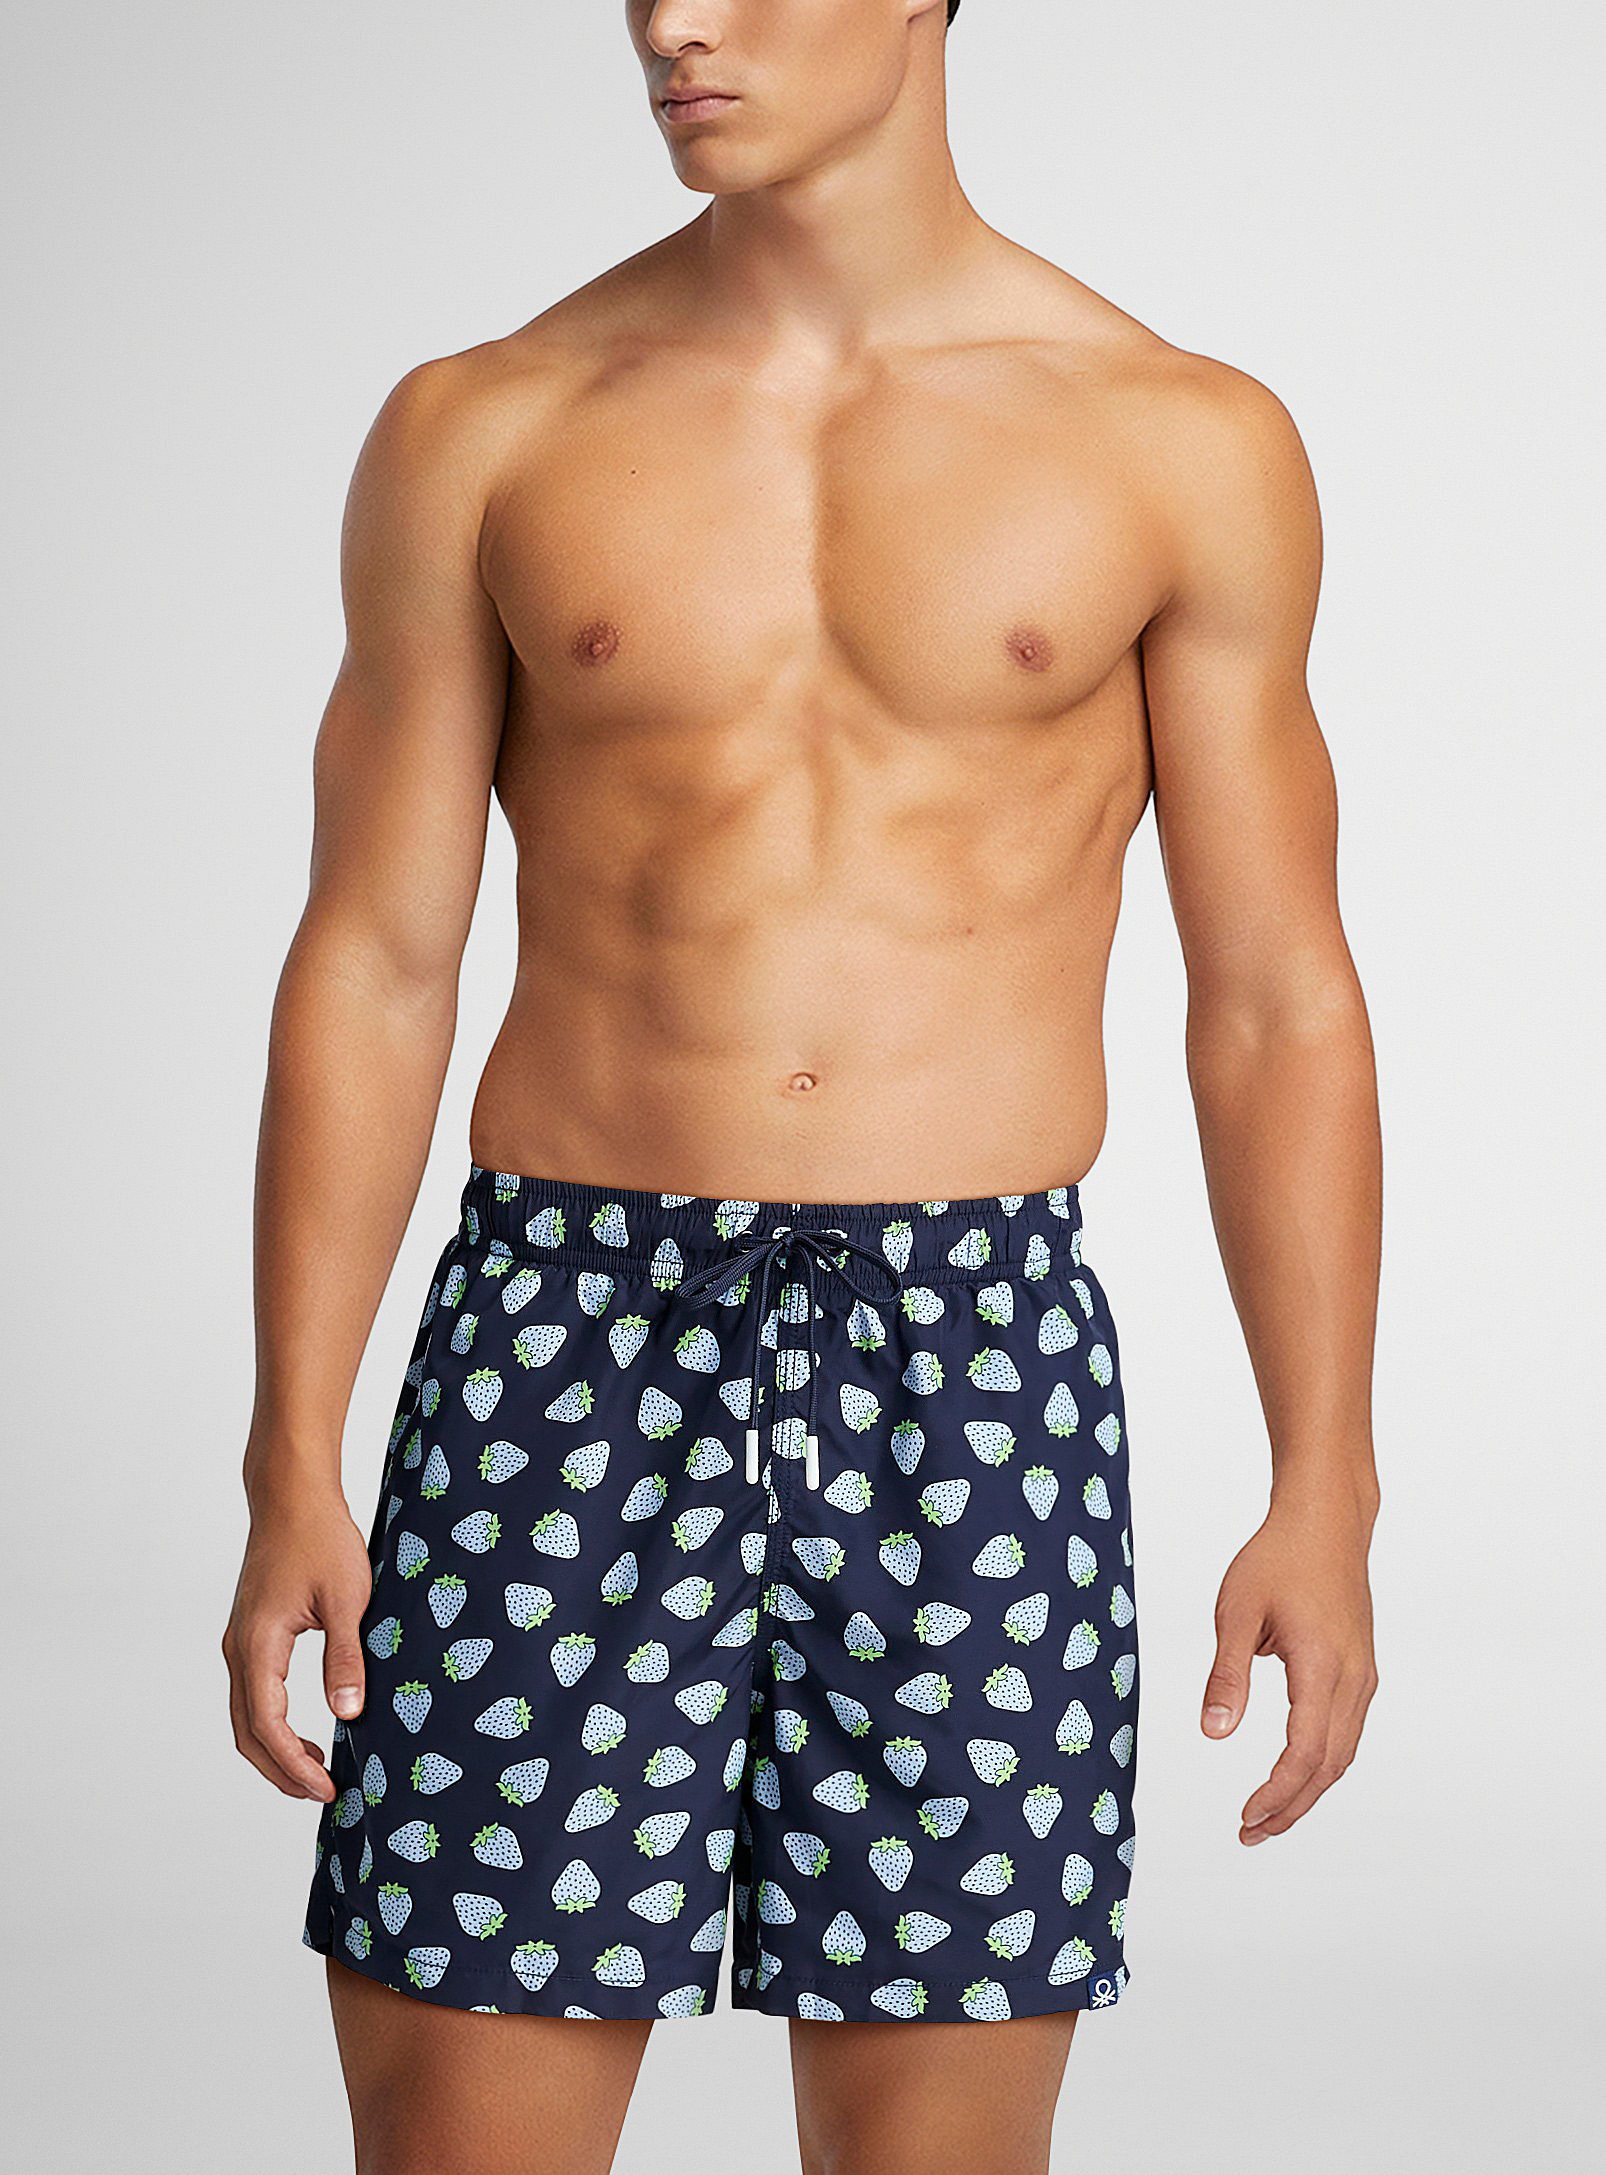 United Colors Of Benetton Muted Strawberry Swim Trunk In Patterned Blue